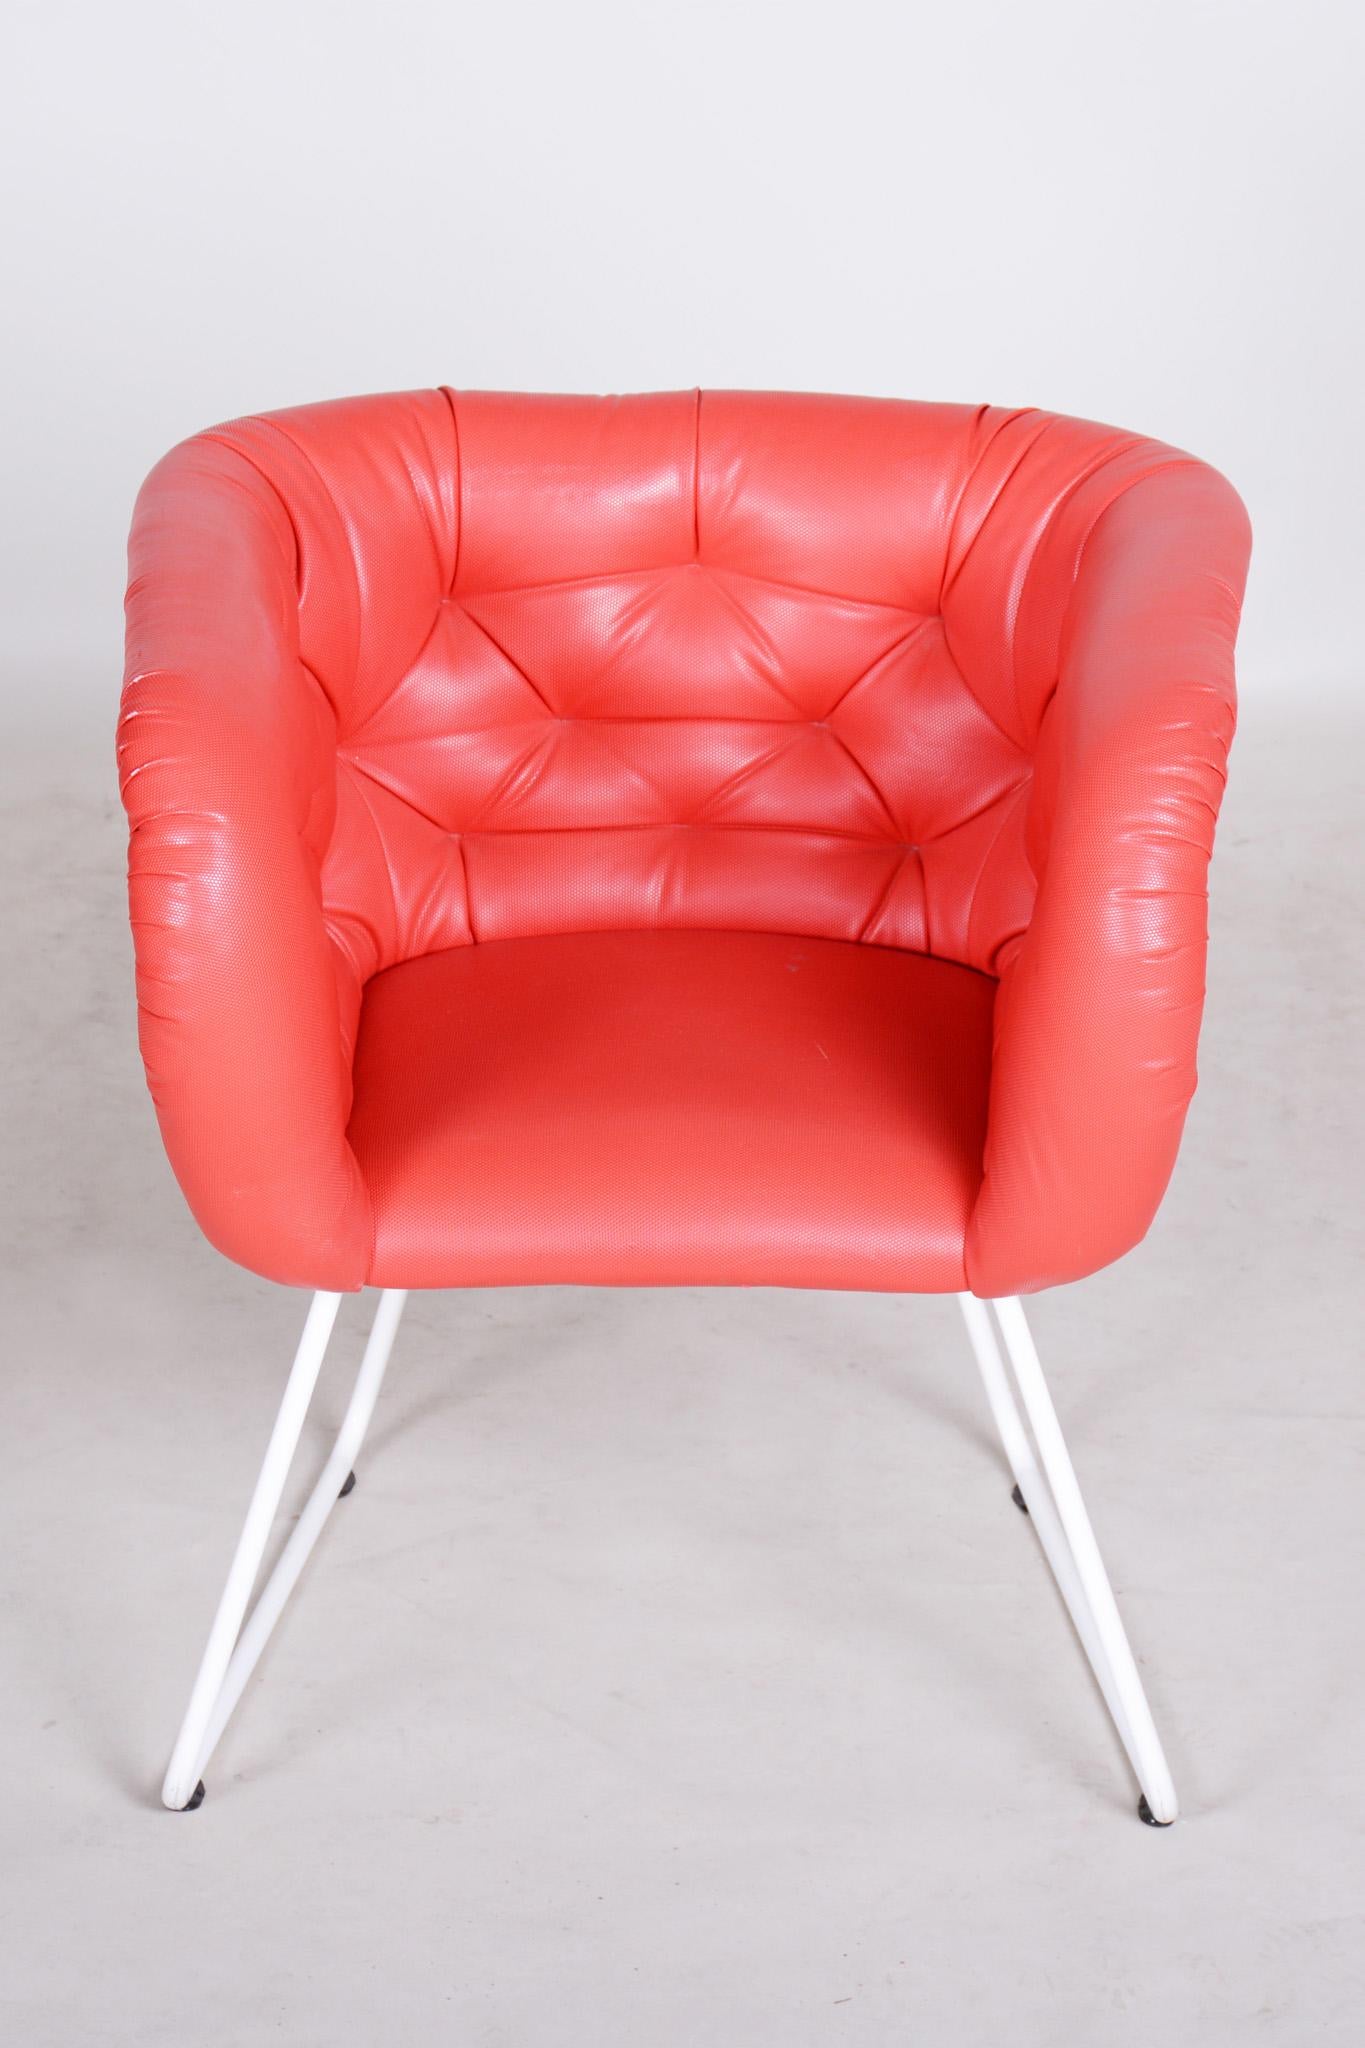 Mid-Century Modern Mid-Century Red and White Armchair, Original Condition, Czechia, 1960s For Sale